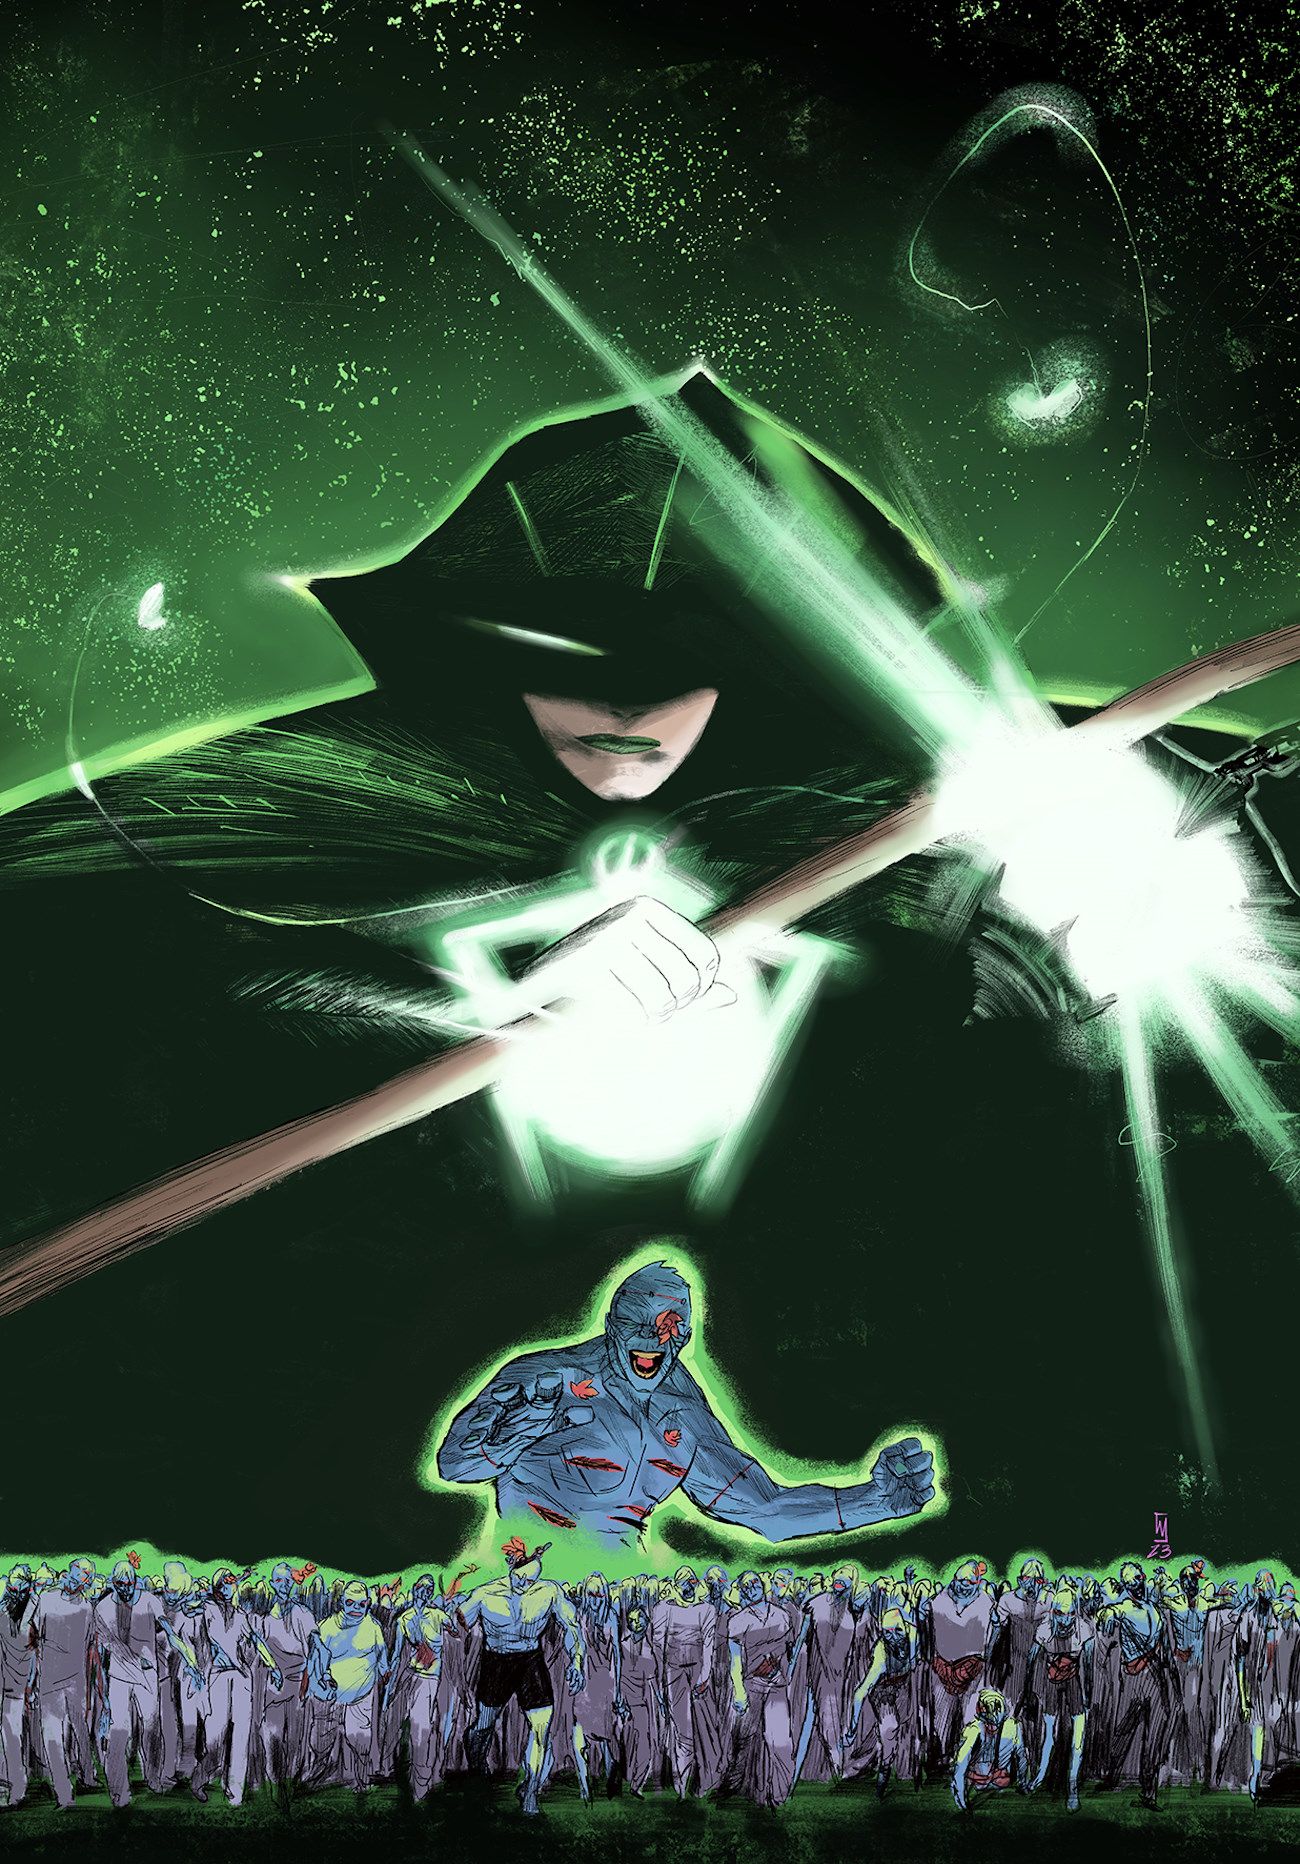 “Only One Hero Remains”: Green Lantern Is Reimagined in DC’s New Dark Fantasy Elseworld